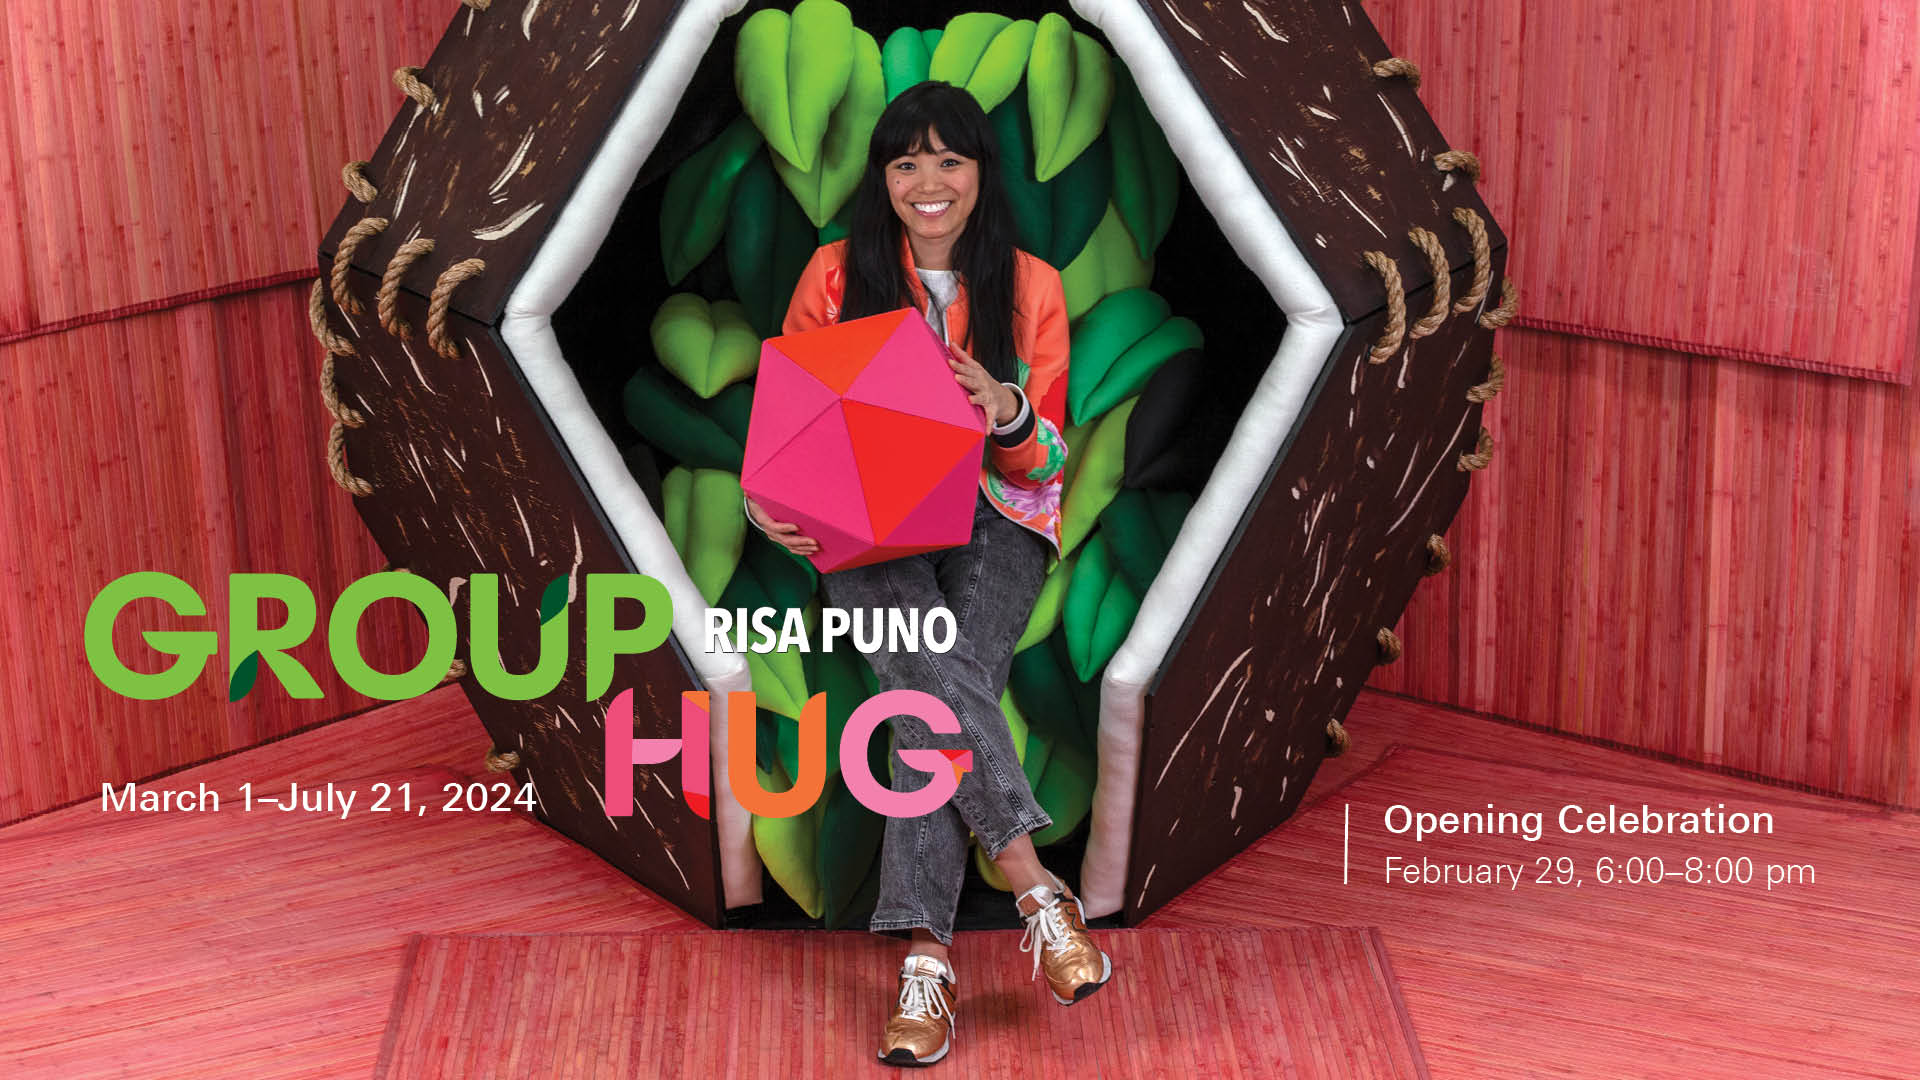 A photograph of the artist Risa Puno, a young woman with black hair, a warm colored blouse and grey jeans, sitting in a brown geometric pod. She is holding a pink and orange multi-sided structure in her hands. Her seat is made of green felted leaves. The walls and floors are all made of the same pink bamboo. The poster reads 